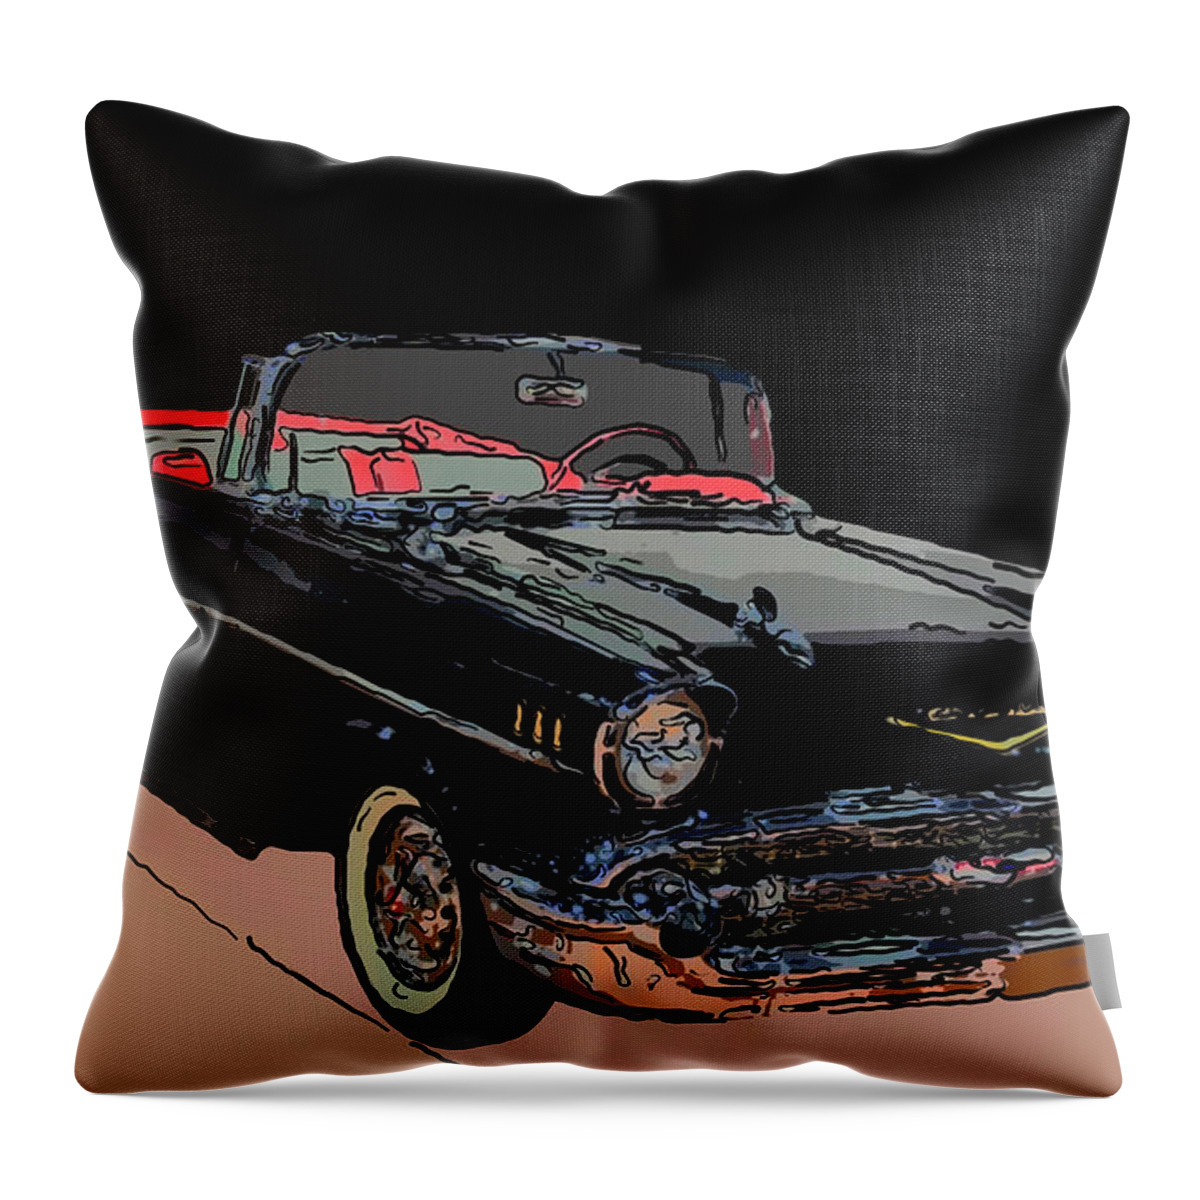 1957 Chevy Bel Air Convertible Throw Pillow featuring the drawing 1957 Chevy Bel Air Convertible Digital drawing by Flees Photos